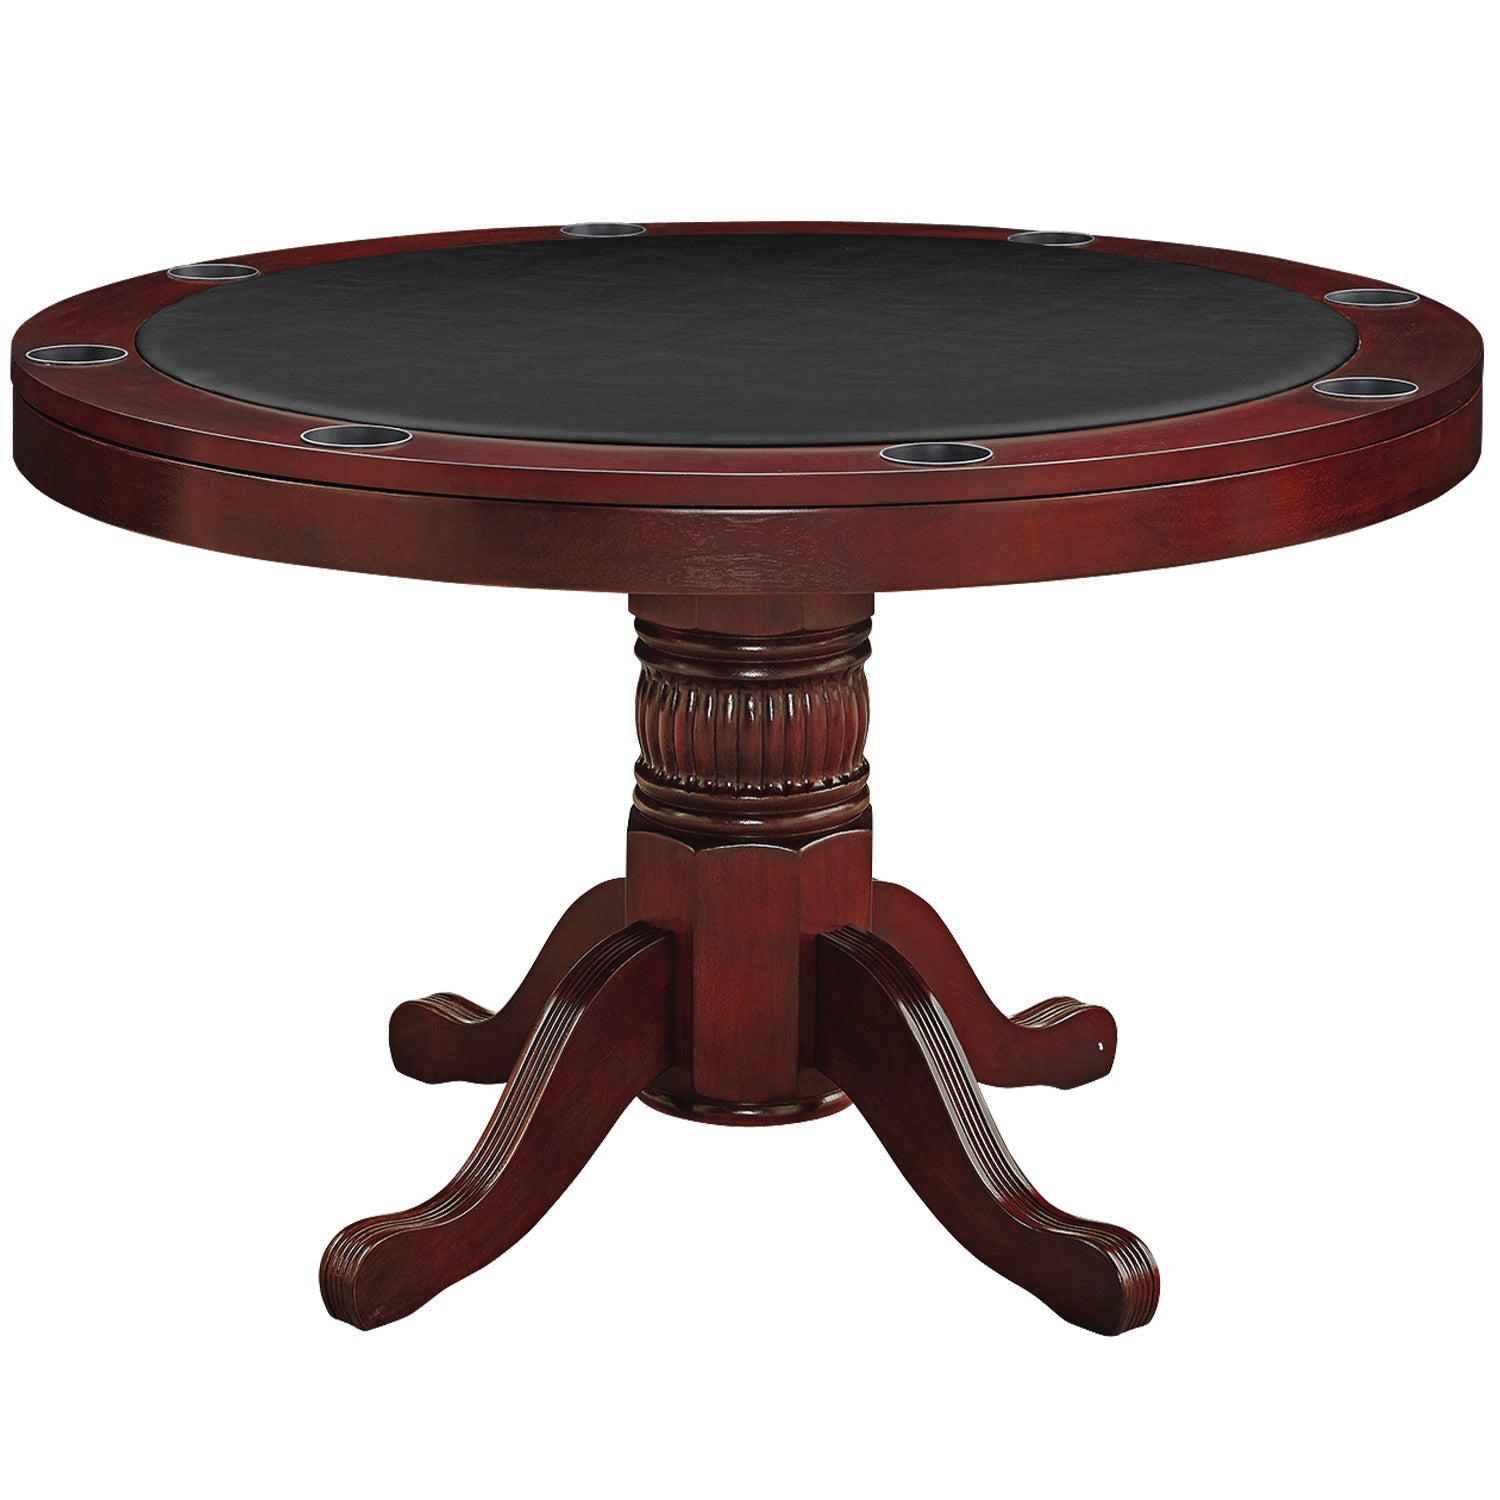 Round convertible game table with a black padded vinyl game top in an English tudor finish.